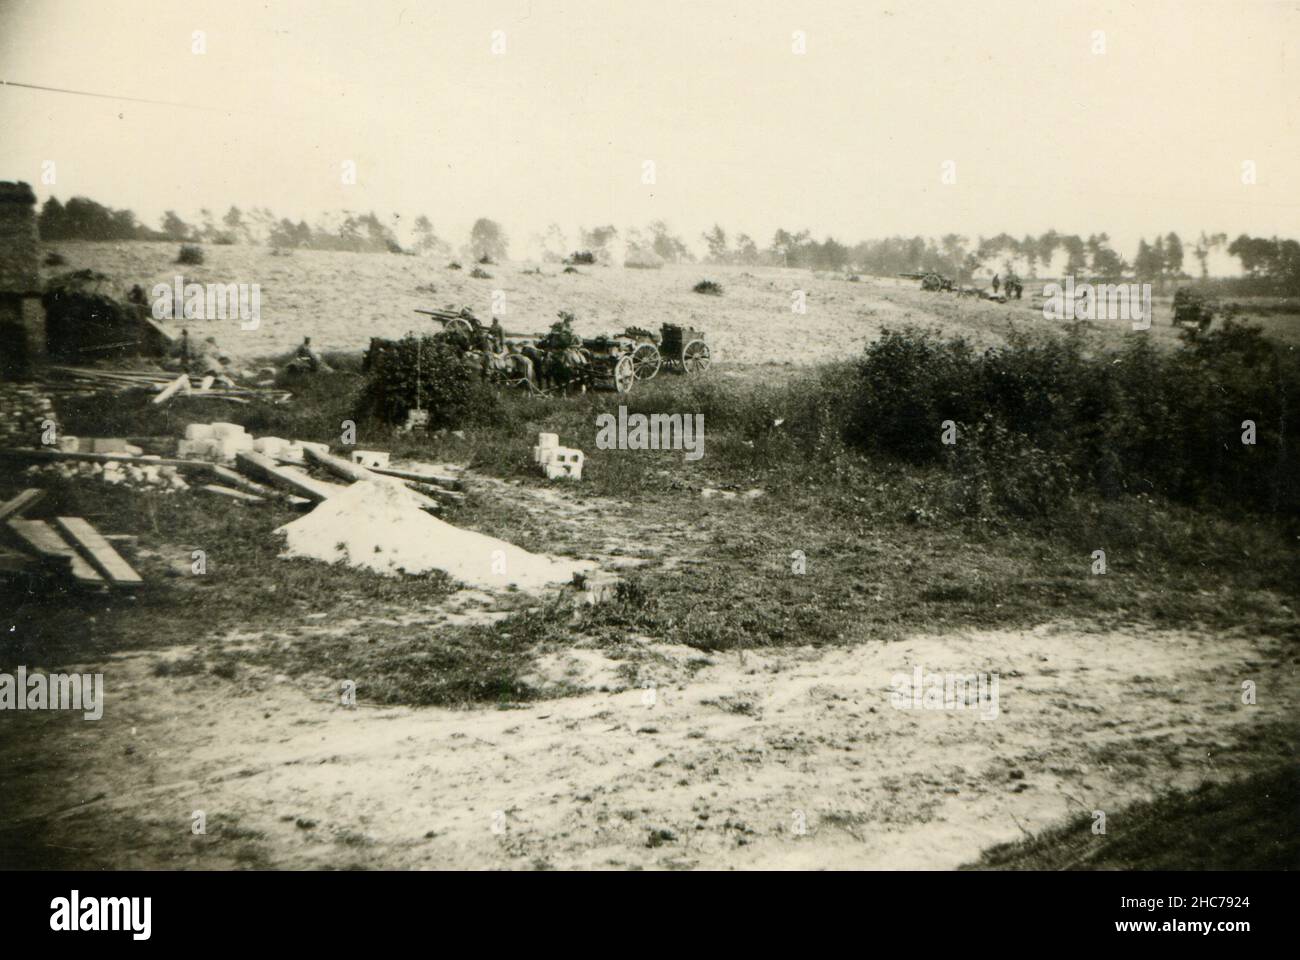 WWII WW2 german soldiers invades Poland - Tomaszów Lubelski, Poland 09/22/1939 - polish abandon weapons and cannons Stock Photo